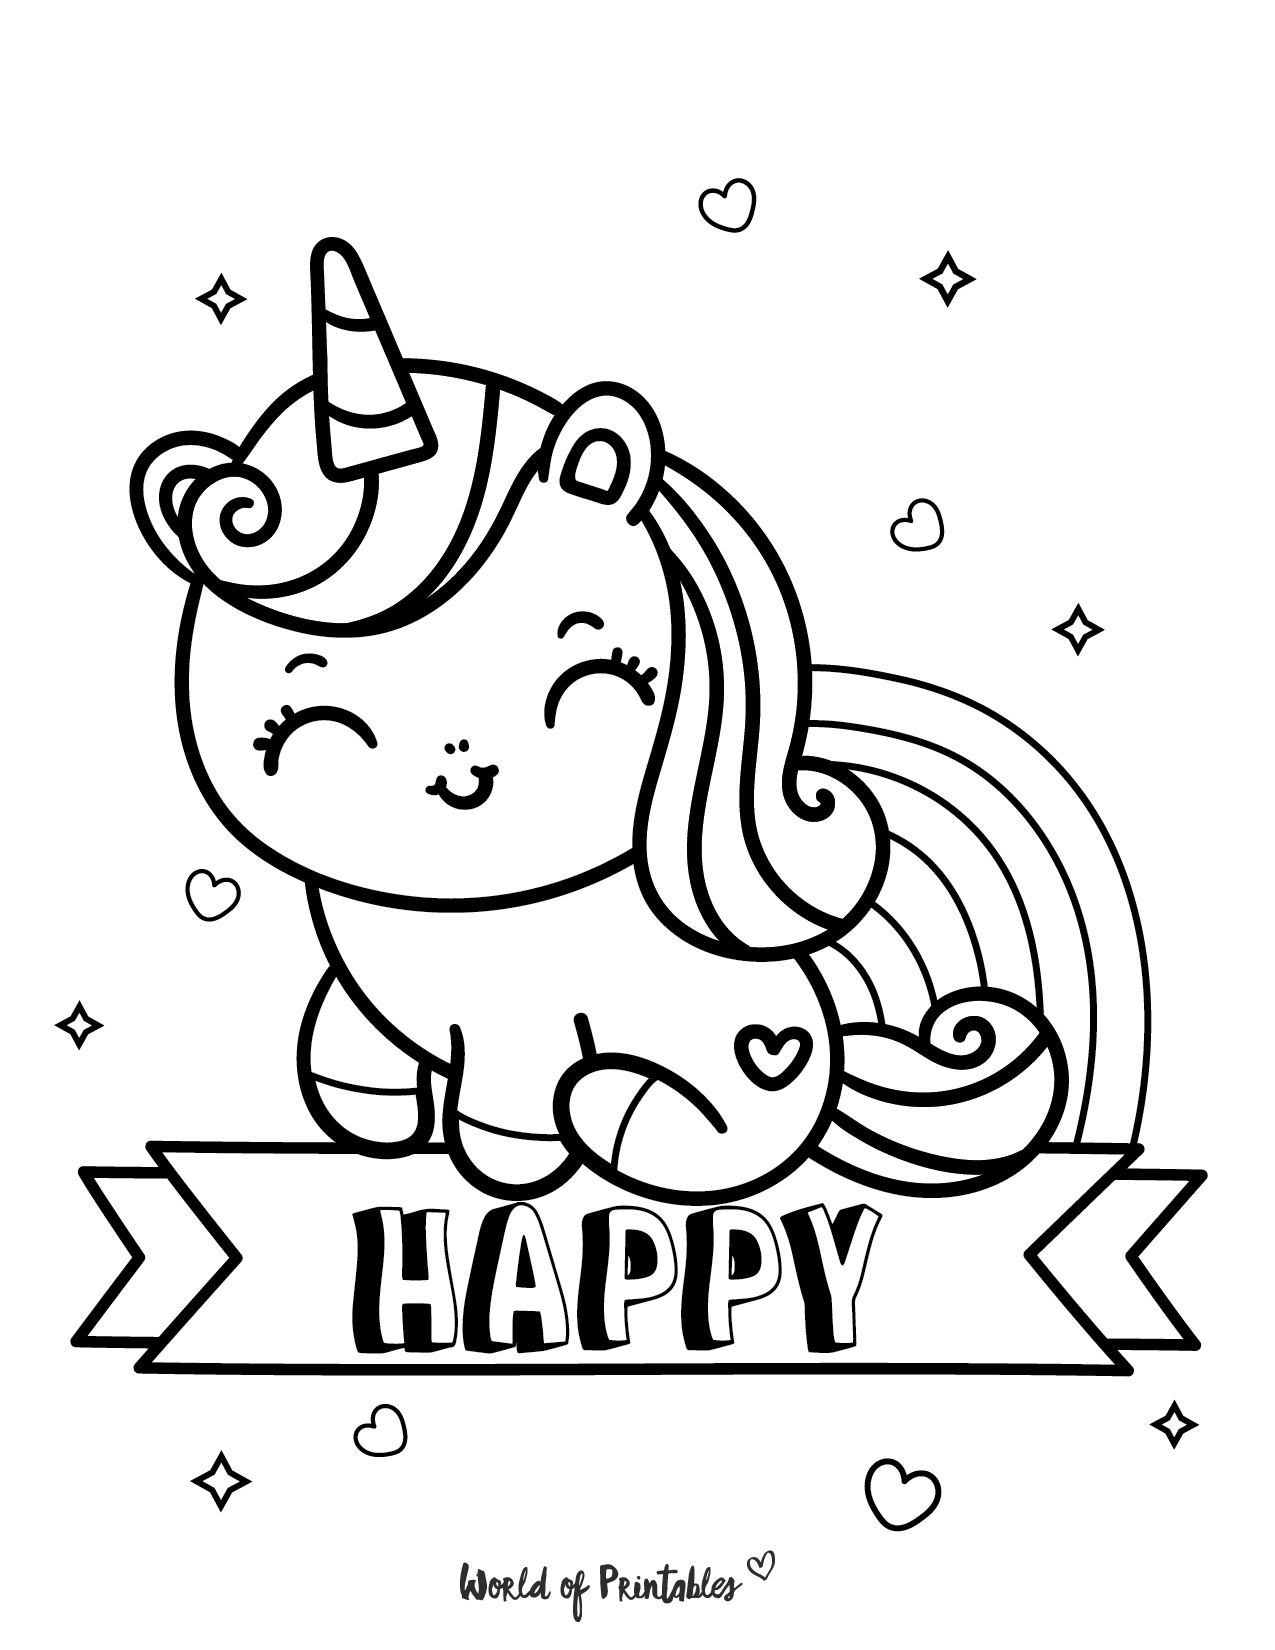 The Best Unicorn Coloring Pages For Kids & Adults   World of ...